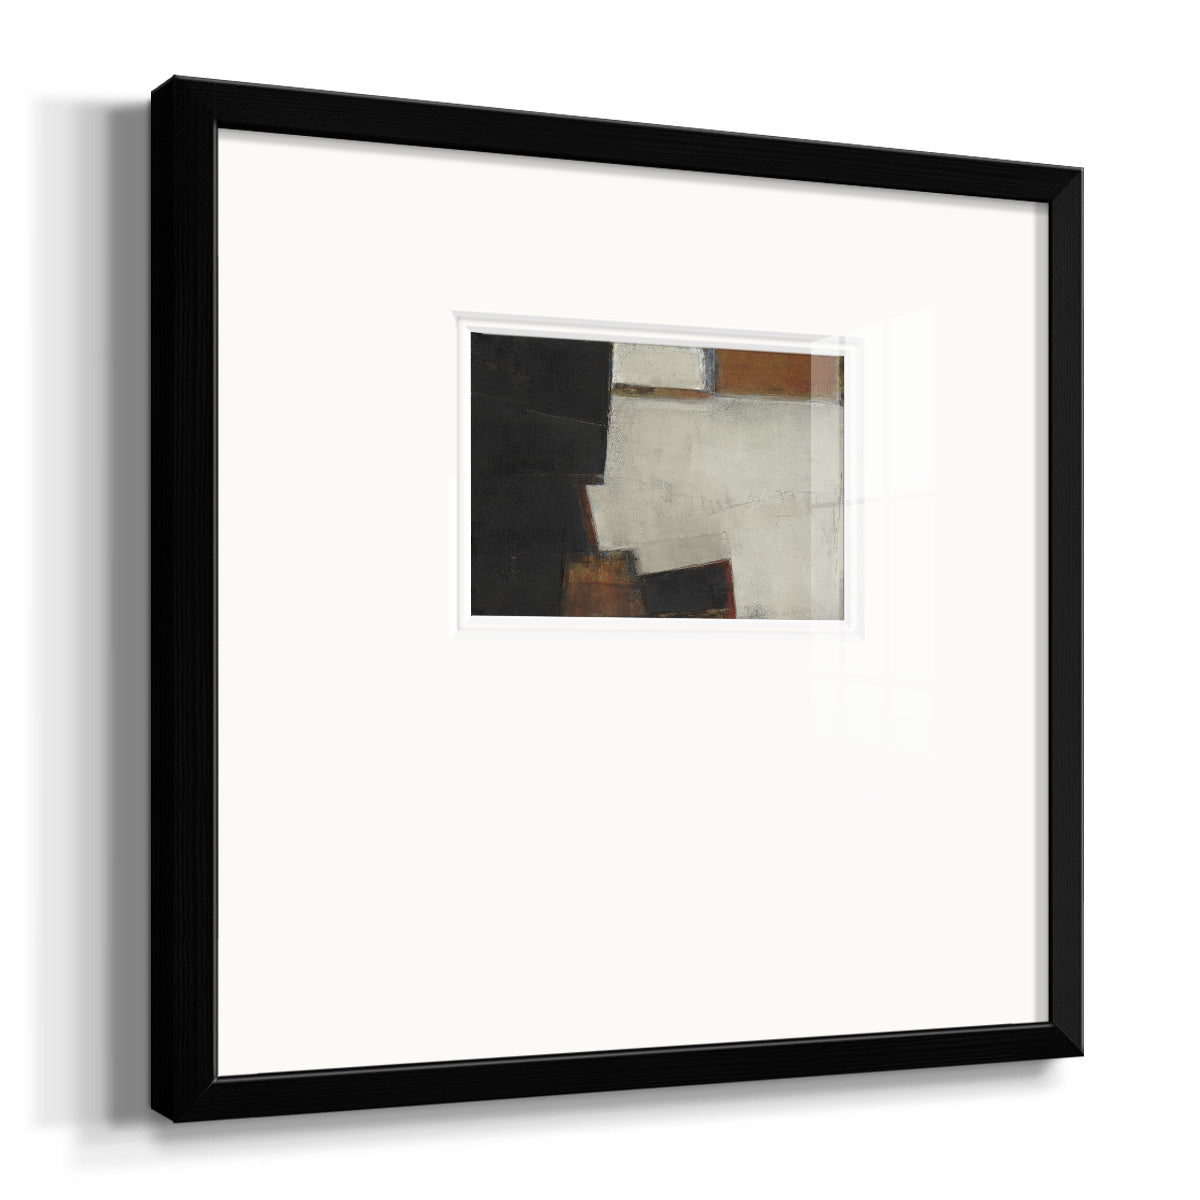 Our Way to Fall Premium Framed Print Double Matboard